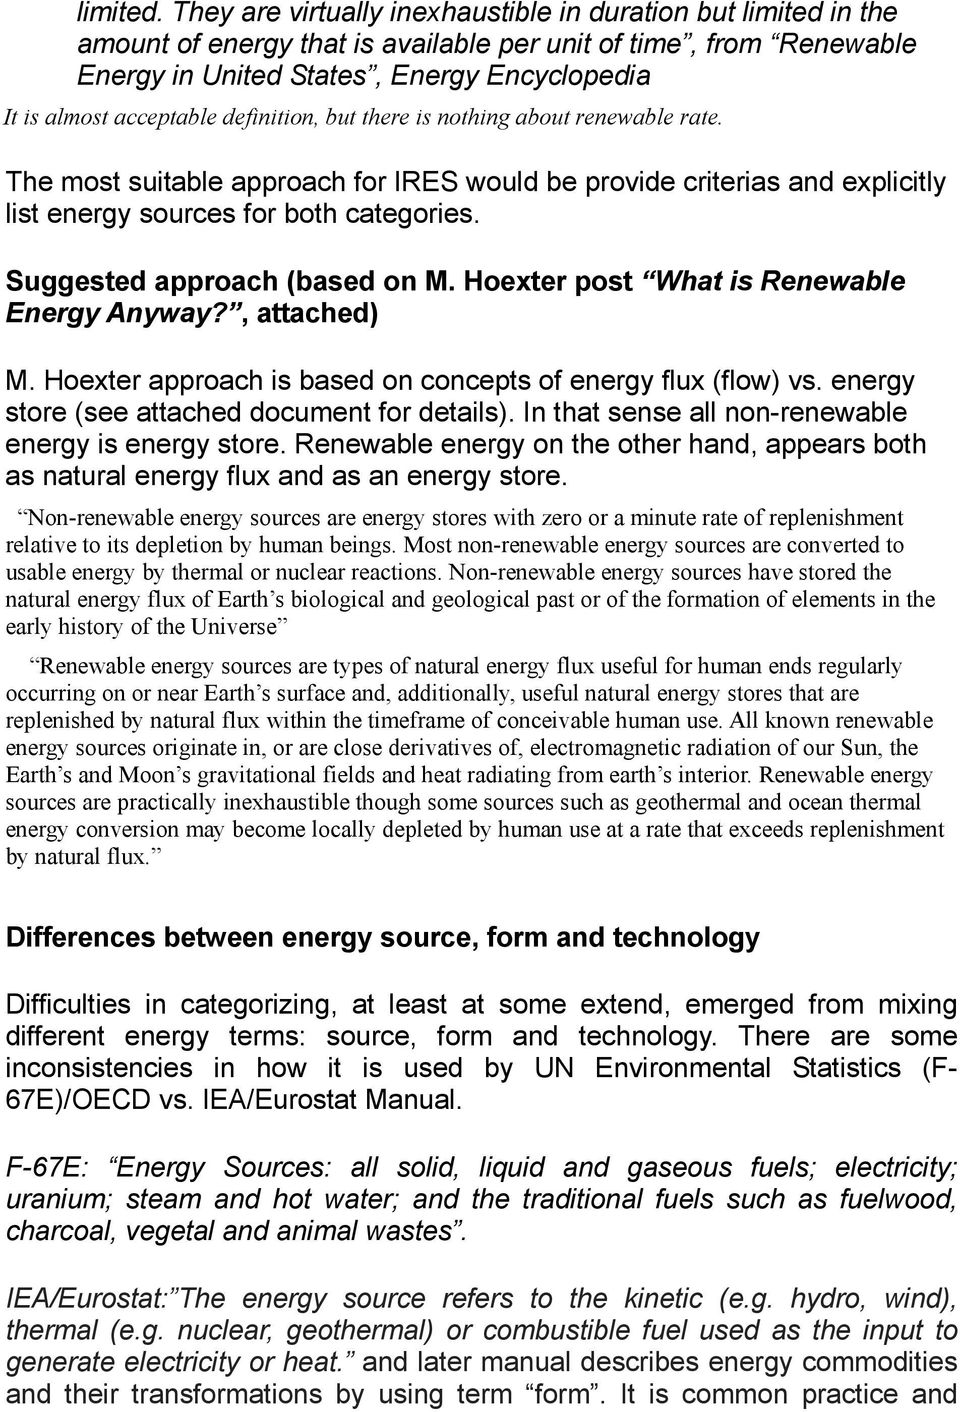 acceptable definition, but there is nothing about renewable rate. The most suitable approach for IRES would be provide criterias and explicitly list energy sources for both categories.